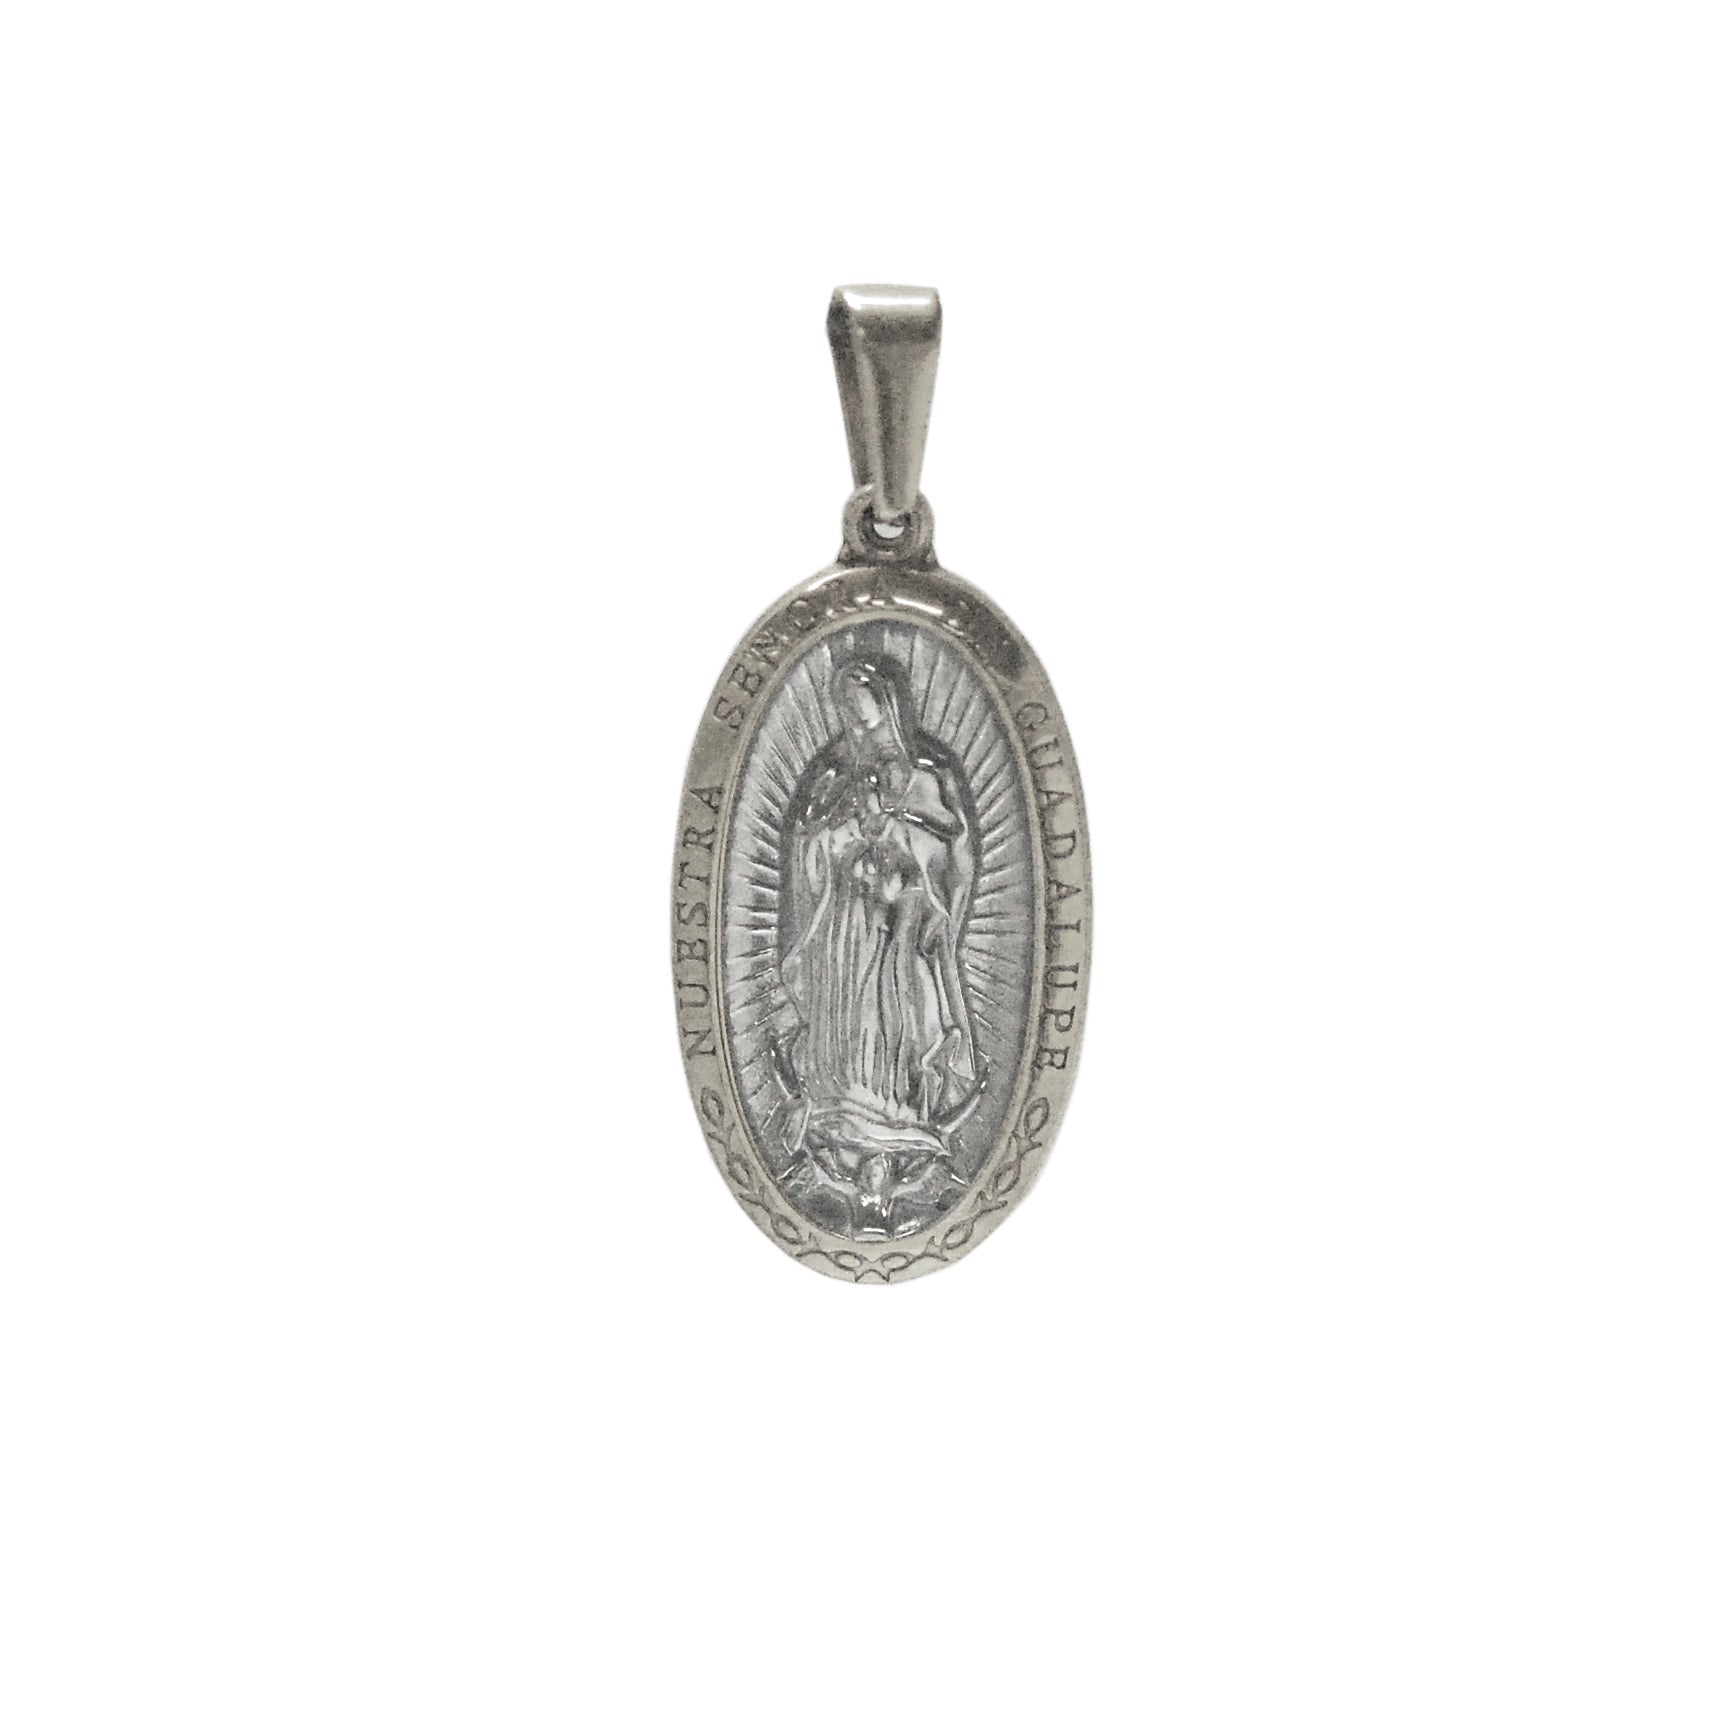 ESP 5631: Lady of Guadalupe Oval Pdant